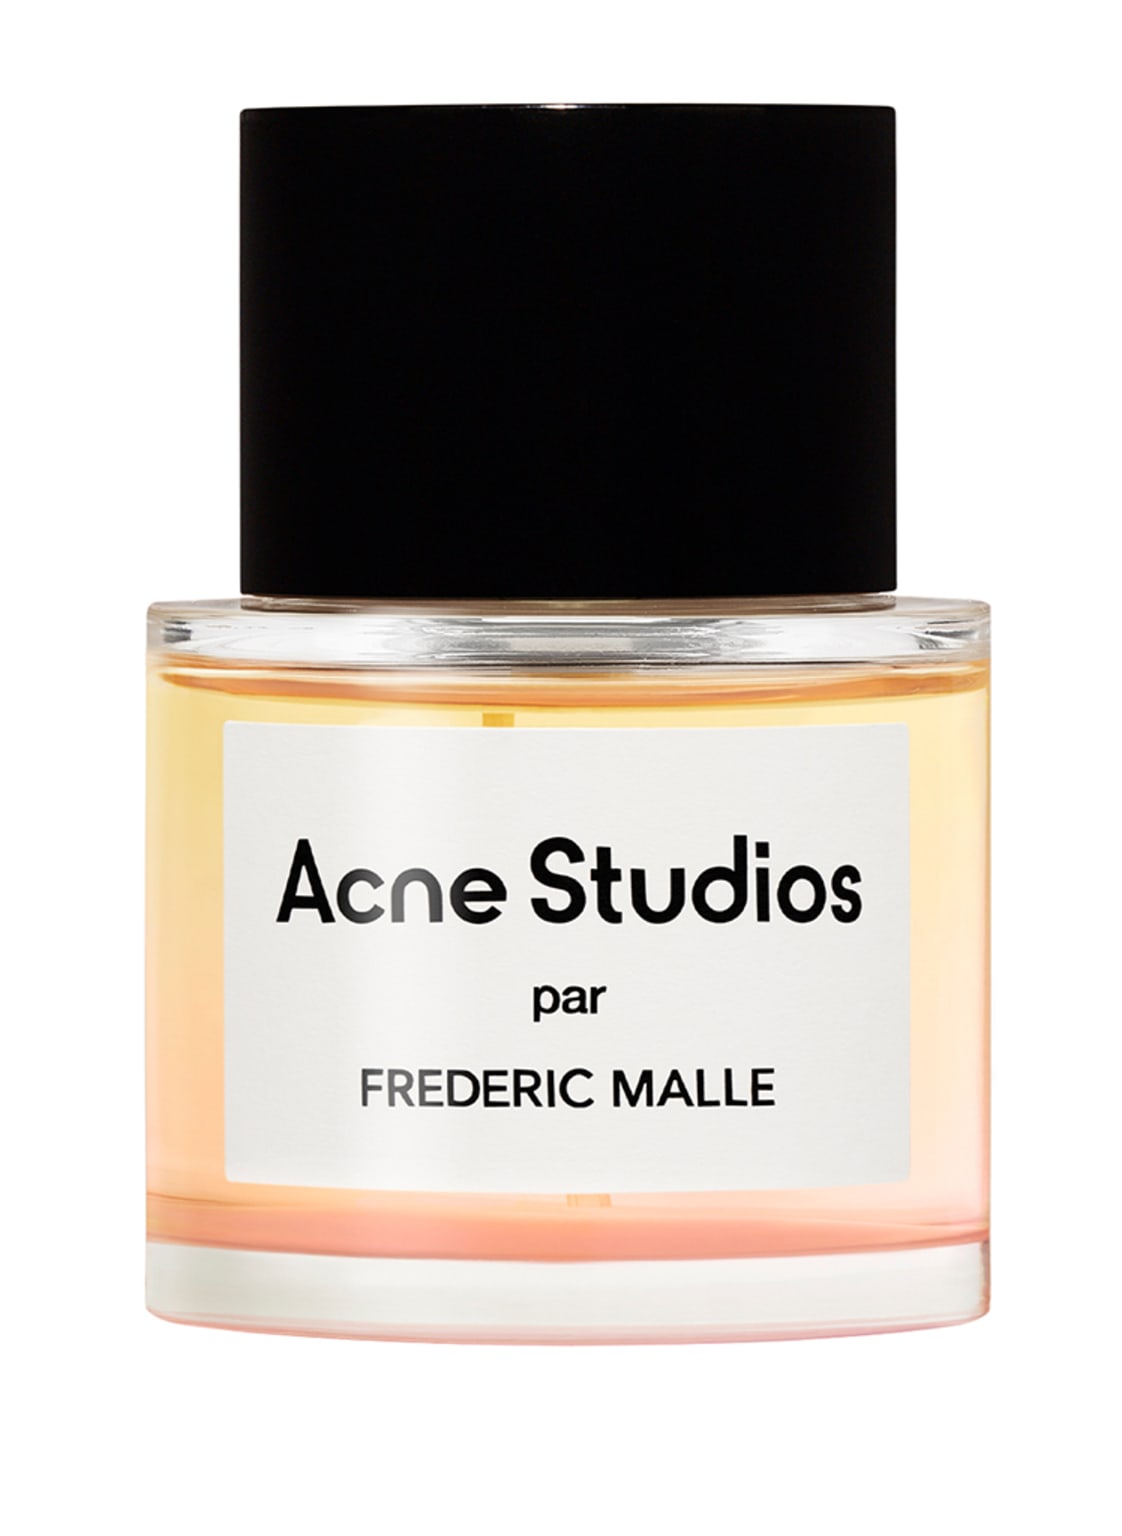 Editions De Parfums Frederic Malle Acne Studios Par Frederic Malle  50 ml von EDITIONS DE PARFUMS FREDERIC MALLE